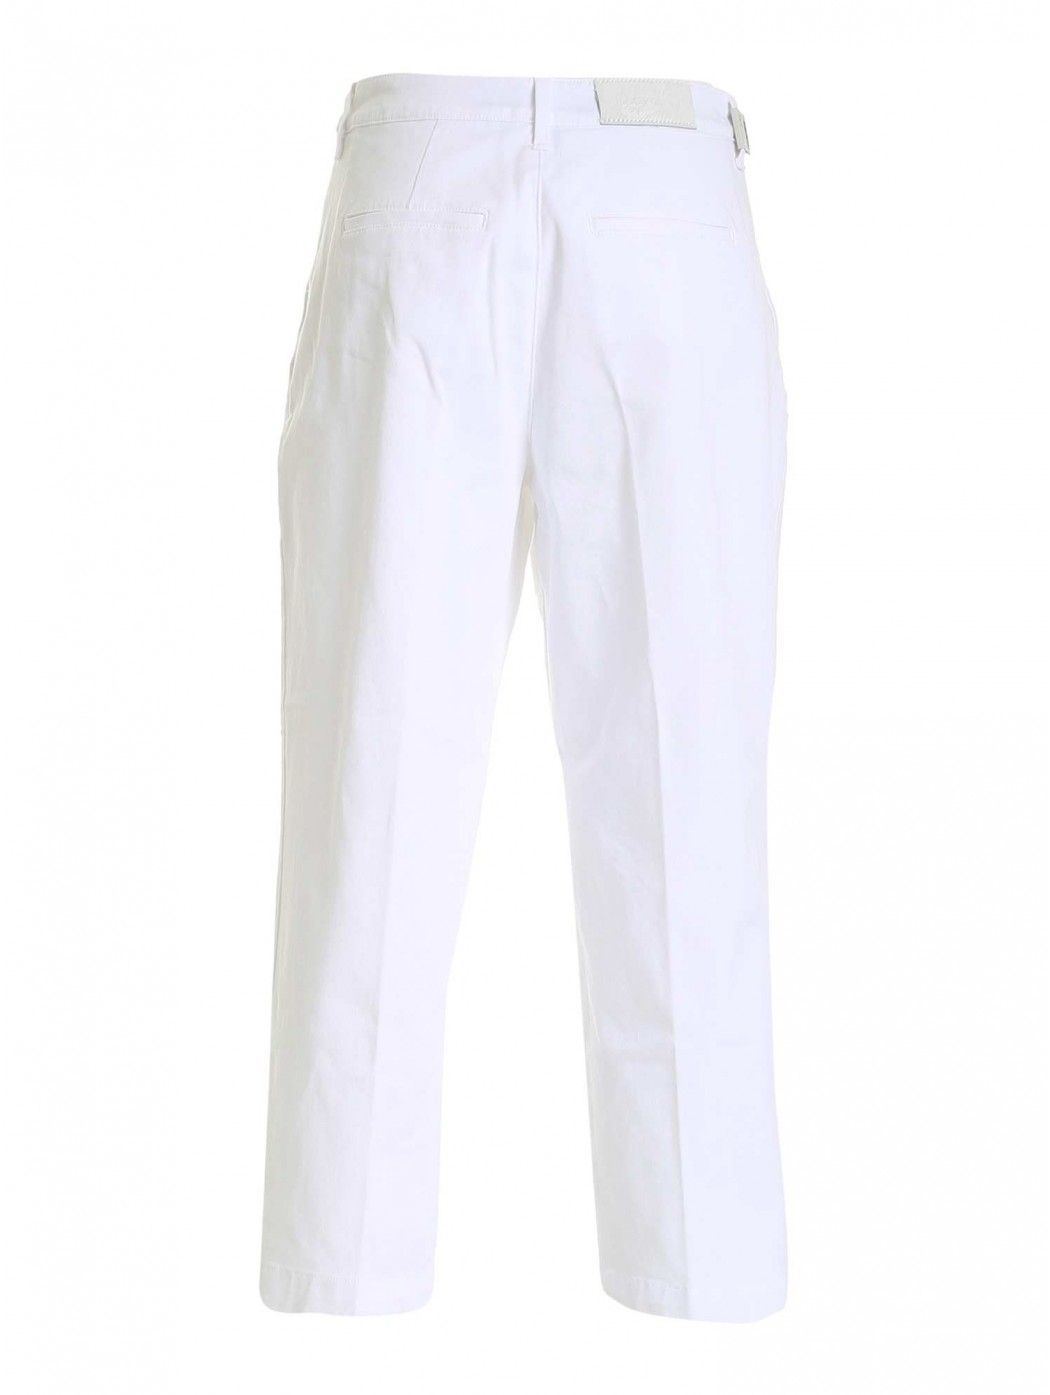 CHINO PPT STR SOLID JACOB COHEN DONNA LINETTE01908S 111